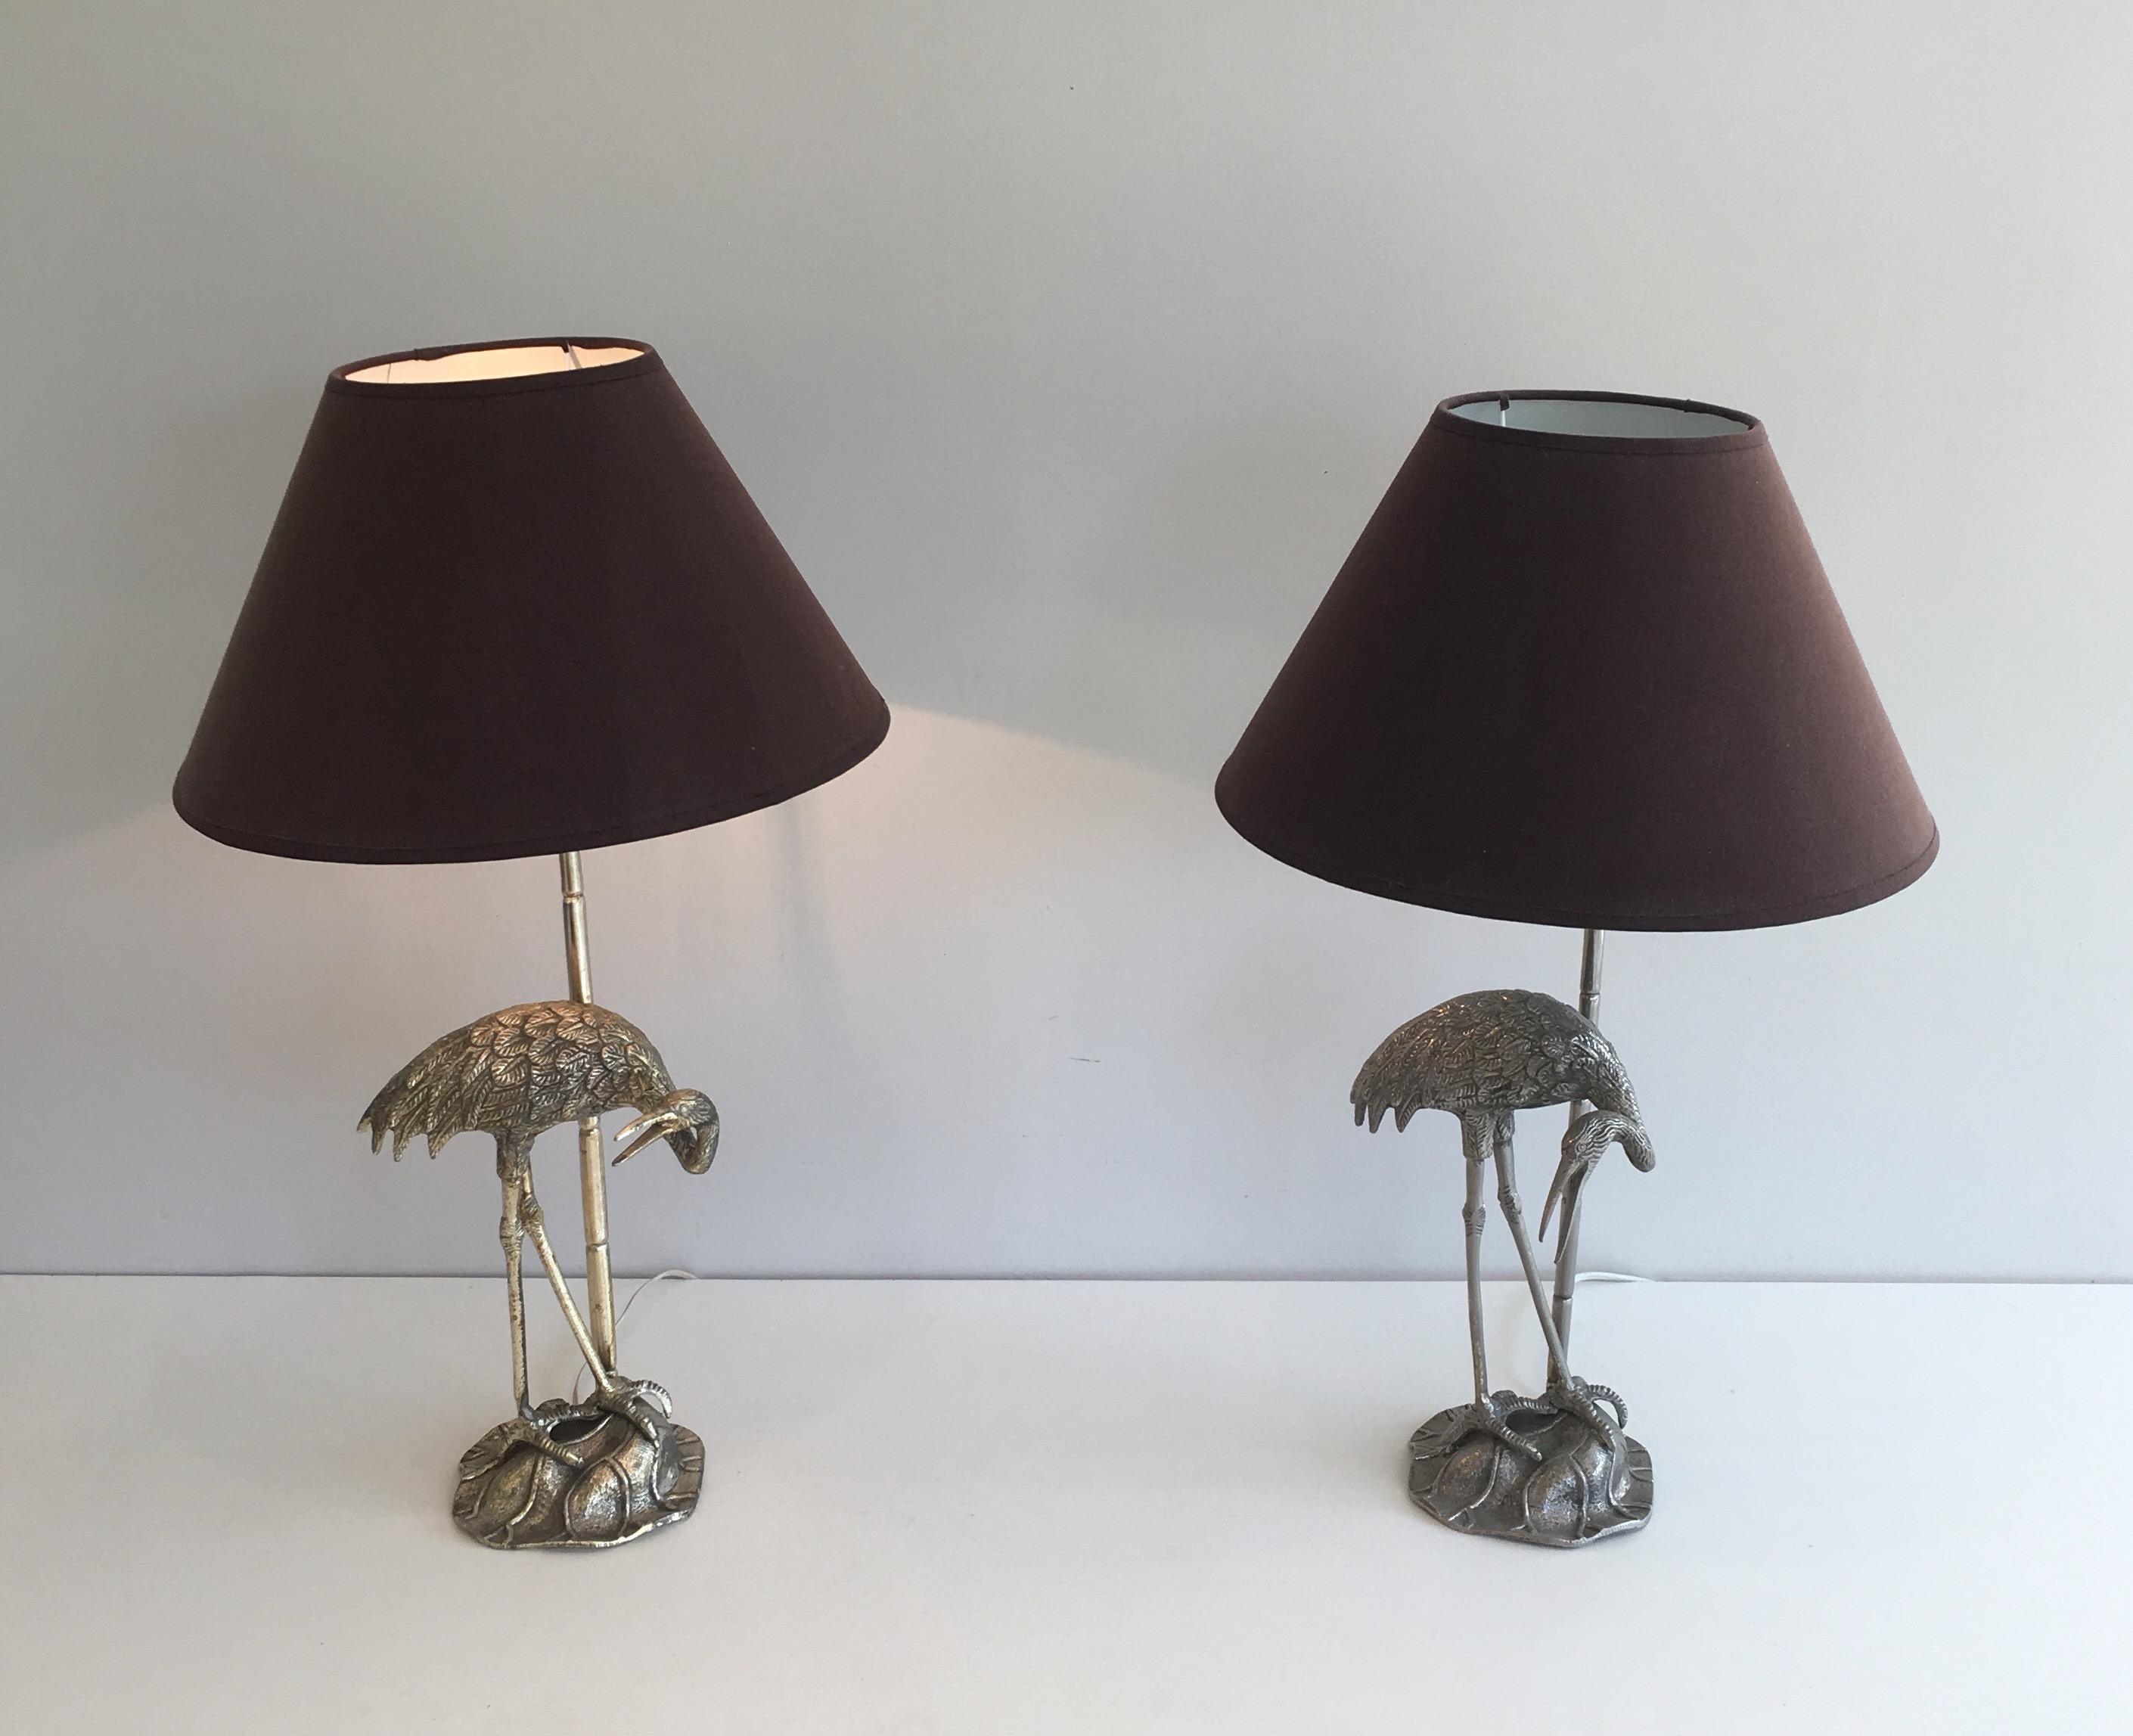 Metal Pair of Silvered Herons Table Lamps. French work by Maison Bagués. Circa 1940